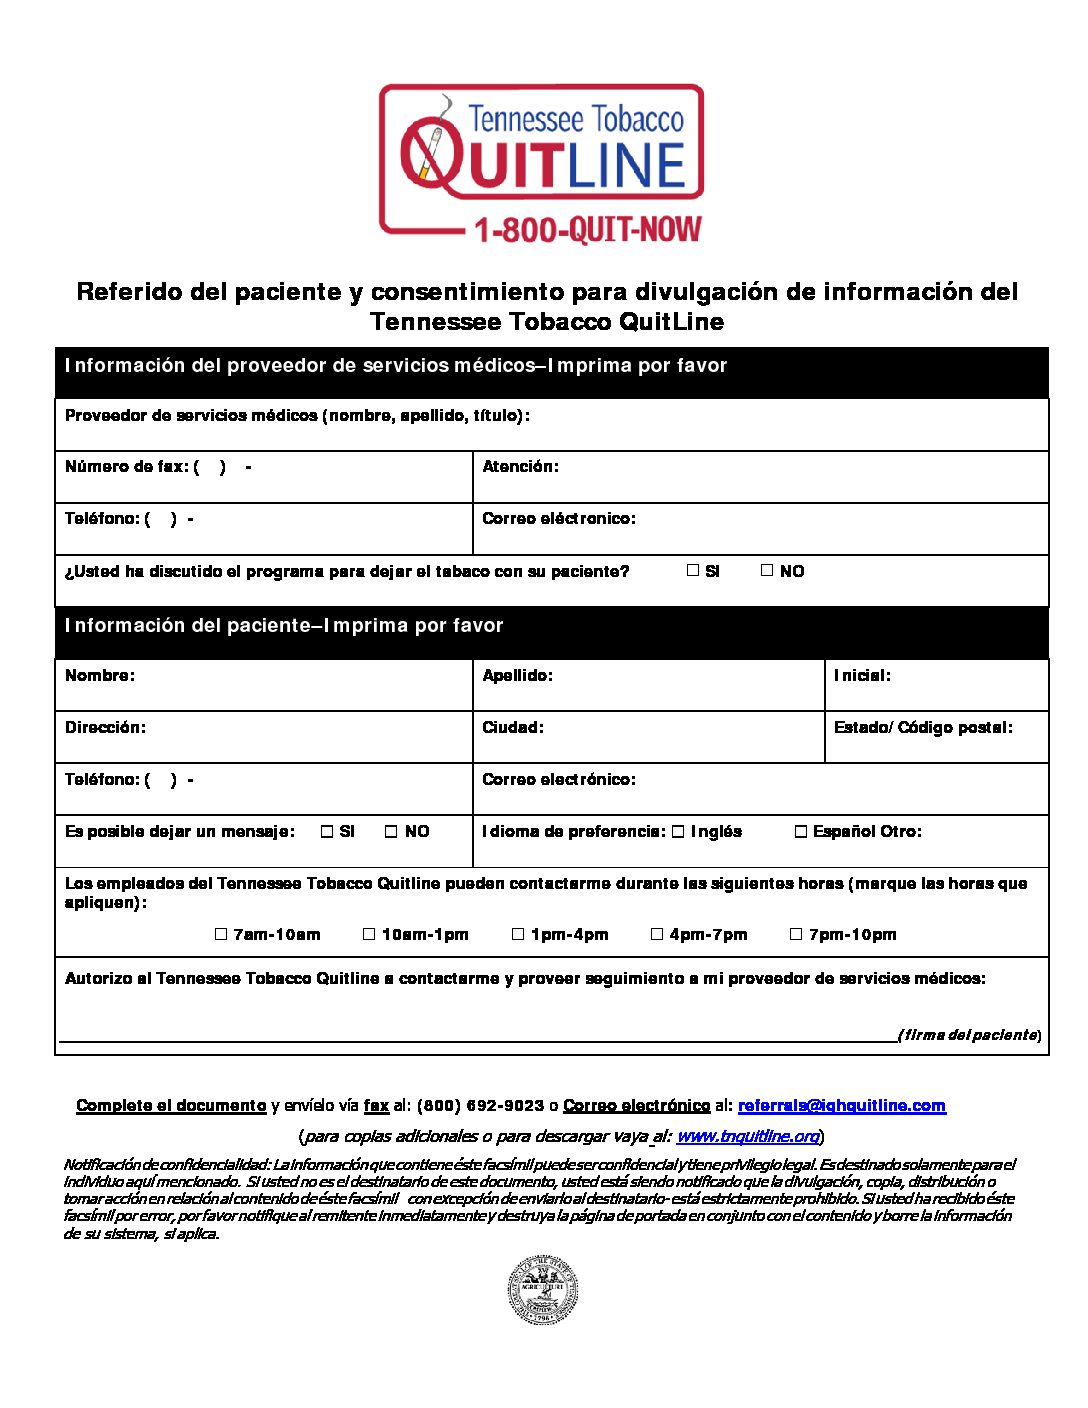 Tennessee Tobacco Quitline Fax Referral Form - Spanish